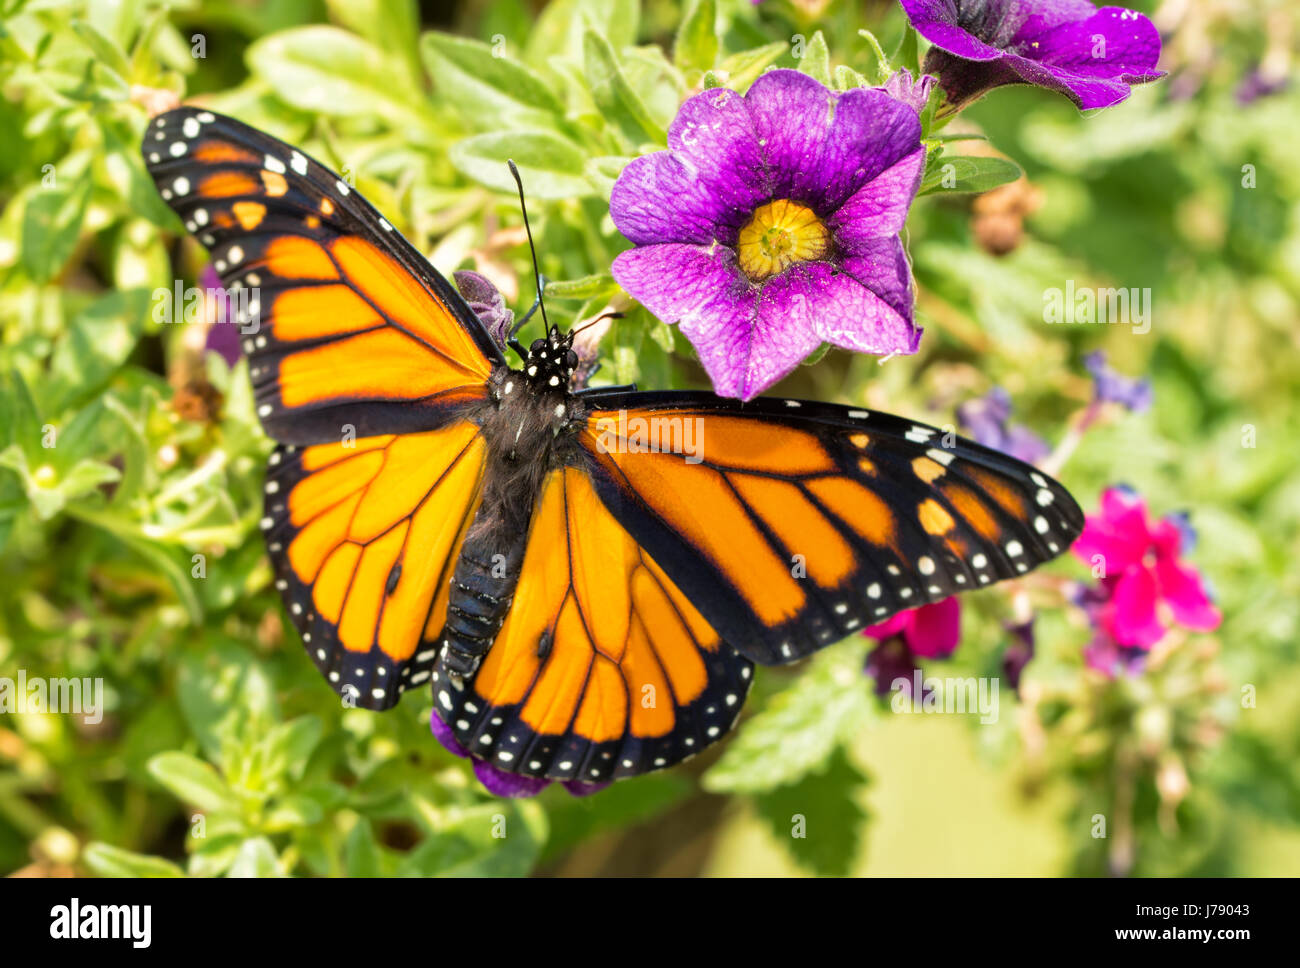 Dorsal view of a male Monarch butterfly on purple flowers Stock Photo